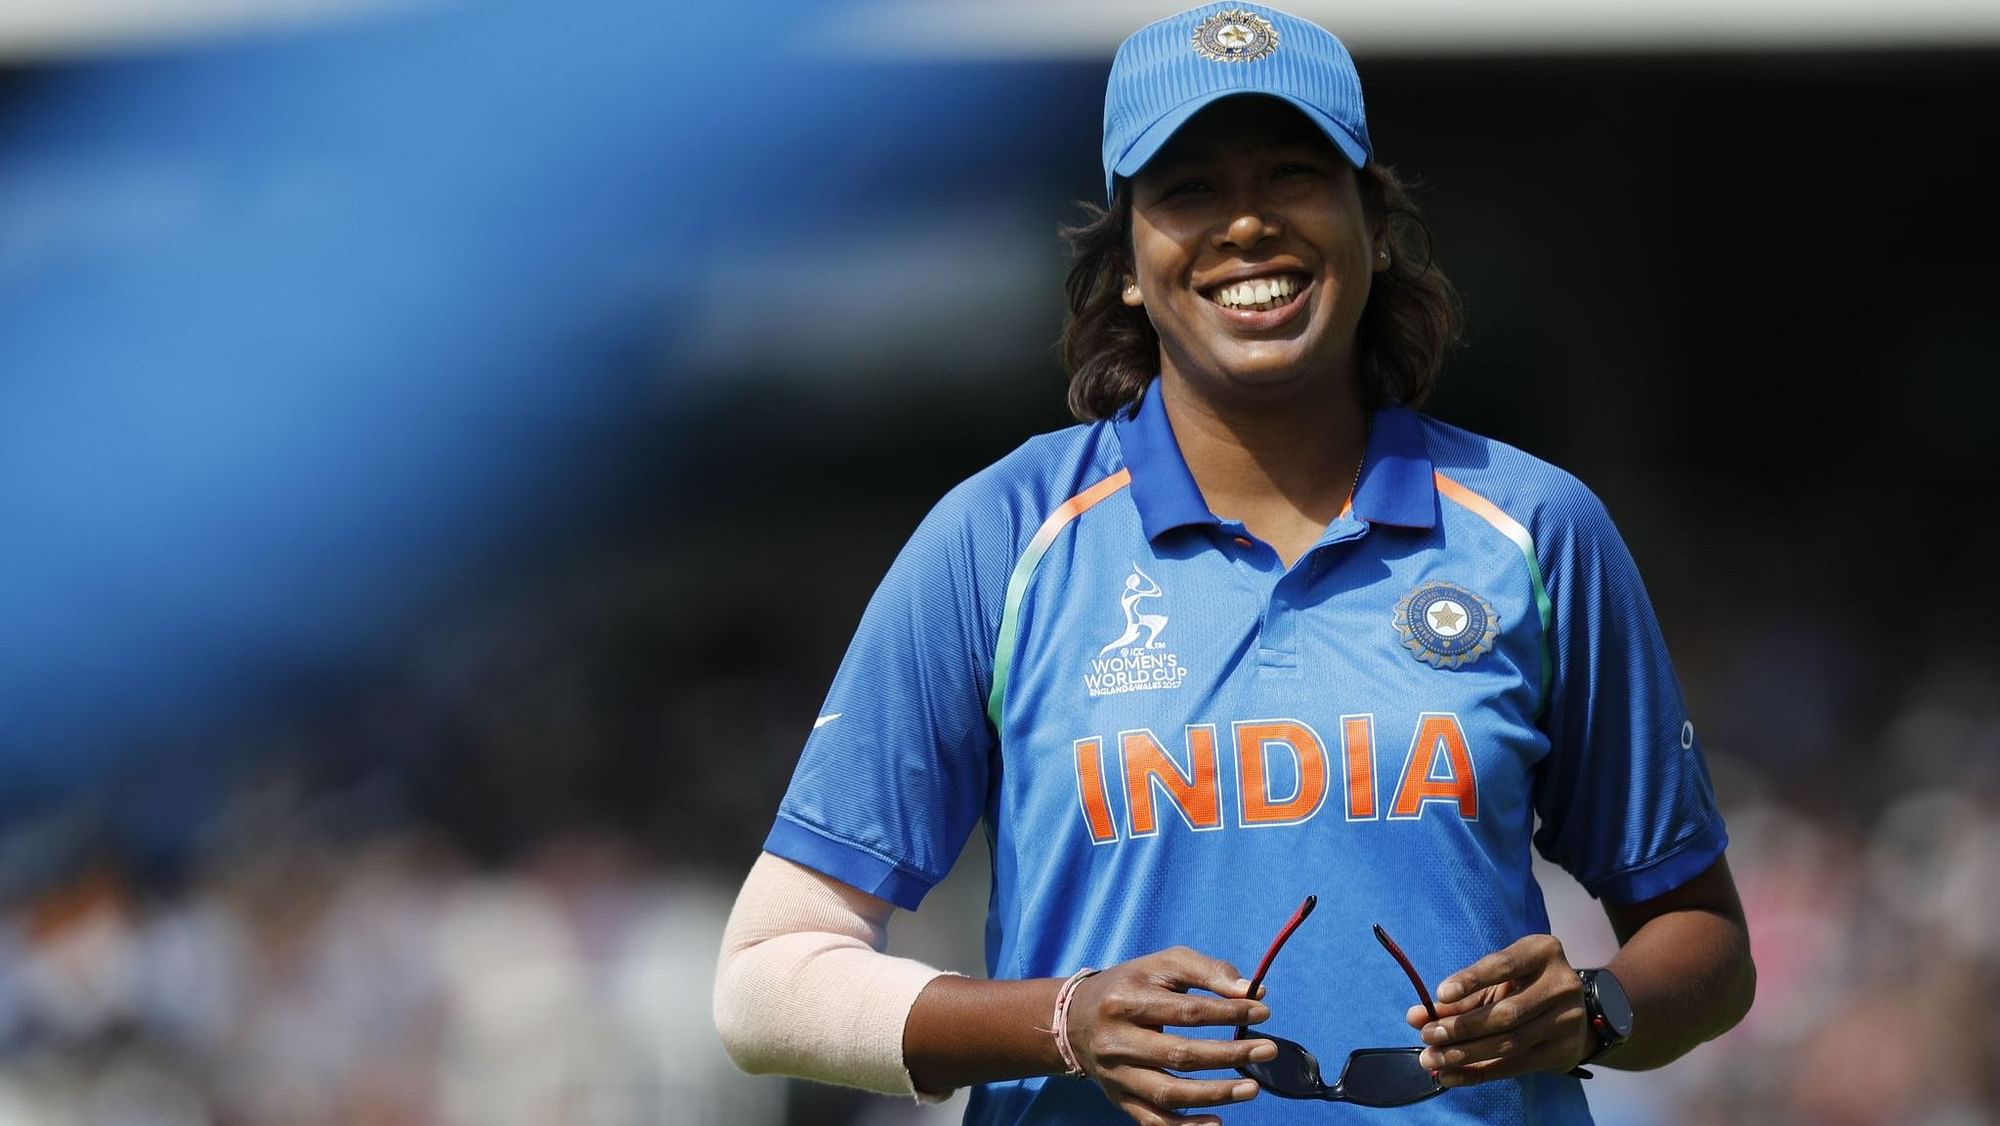 Jhulan Goswami announced her retirement from T20 cricket in August